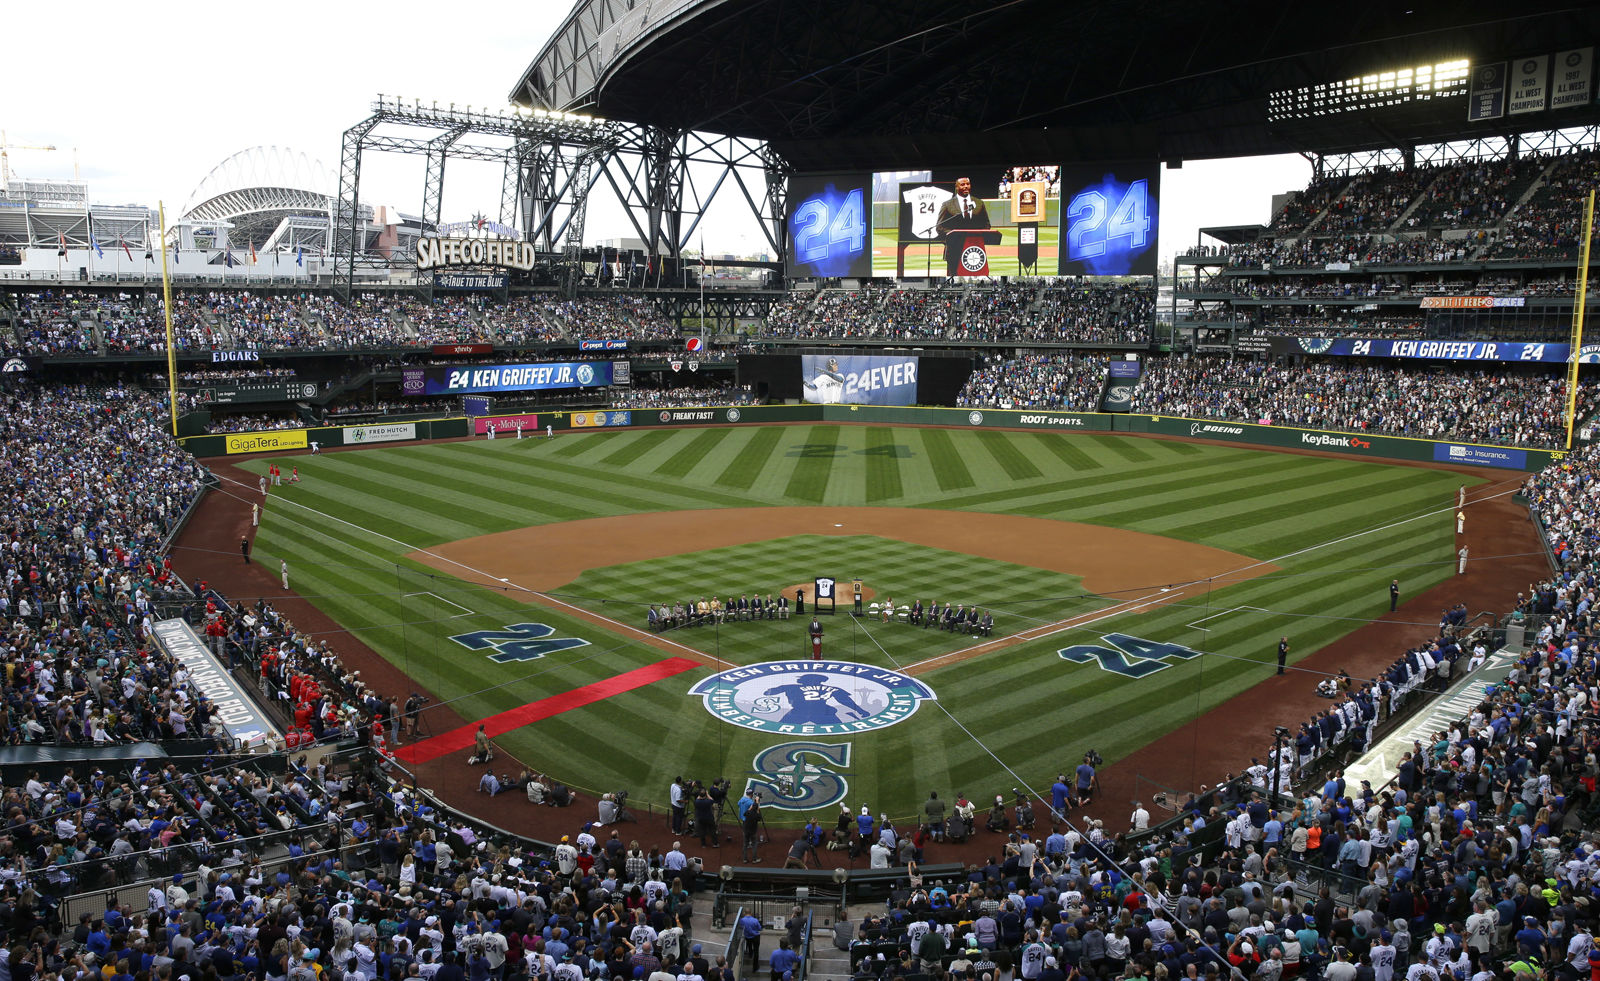 Even the cheapest tickets are expensive at Safeco Field, the home of the Seattle Mariners. The average cost is $92.83. File. (AP Photo/Ted S. Warren)